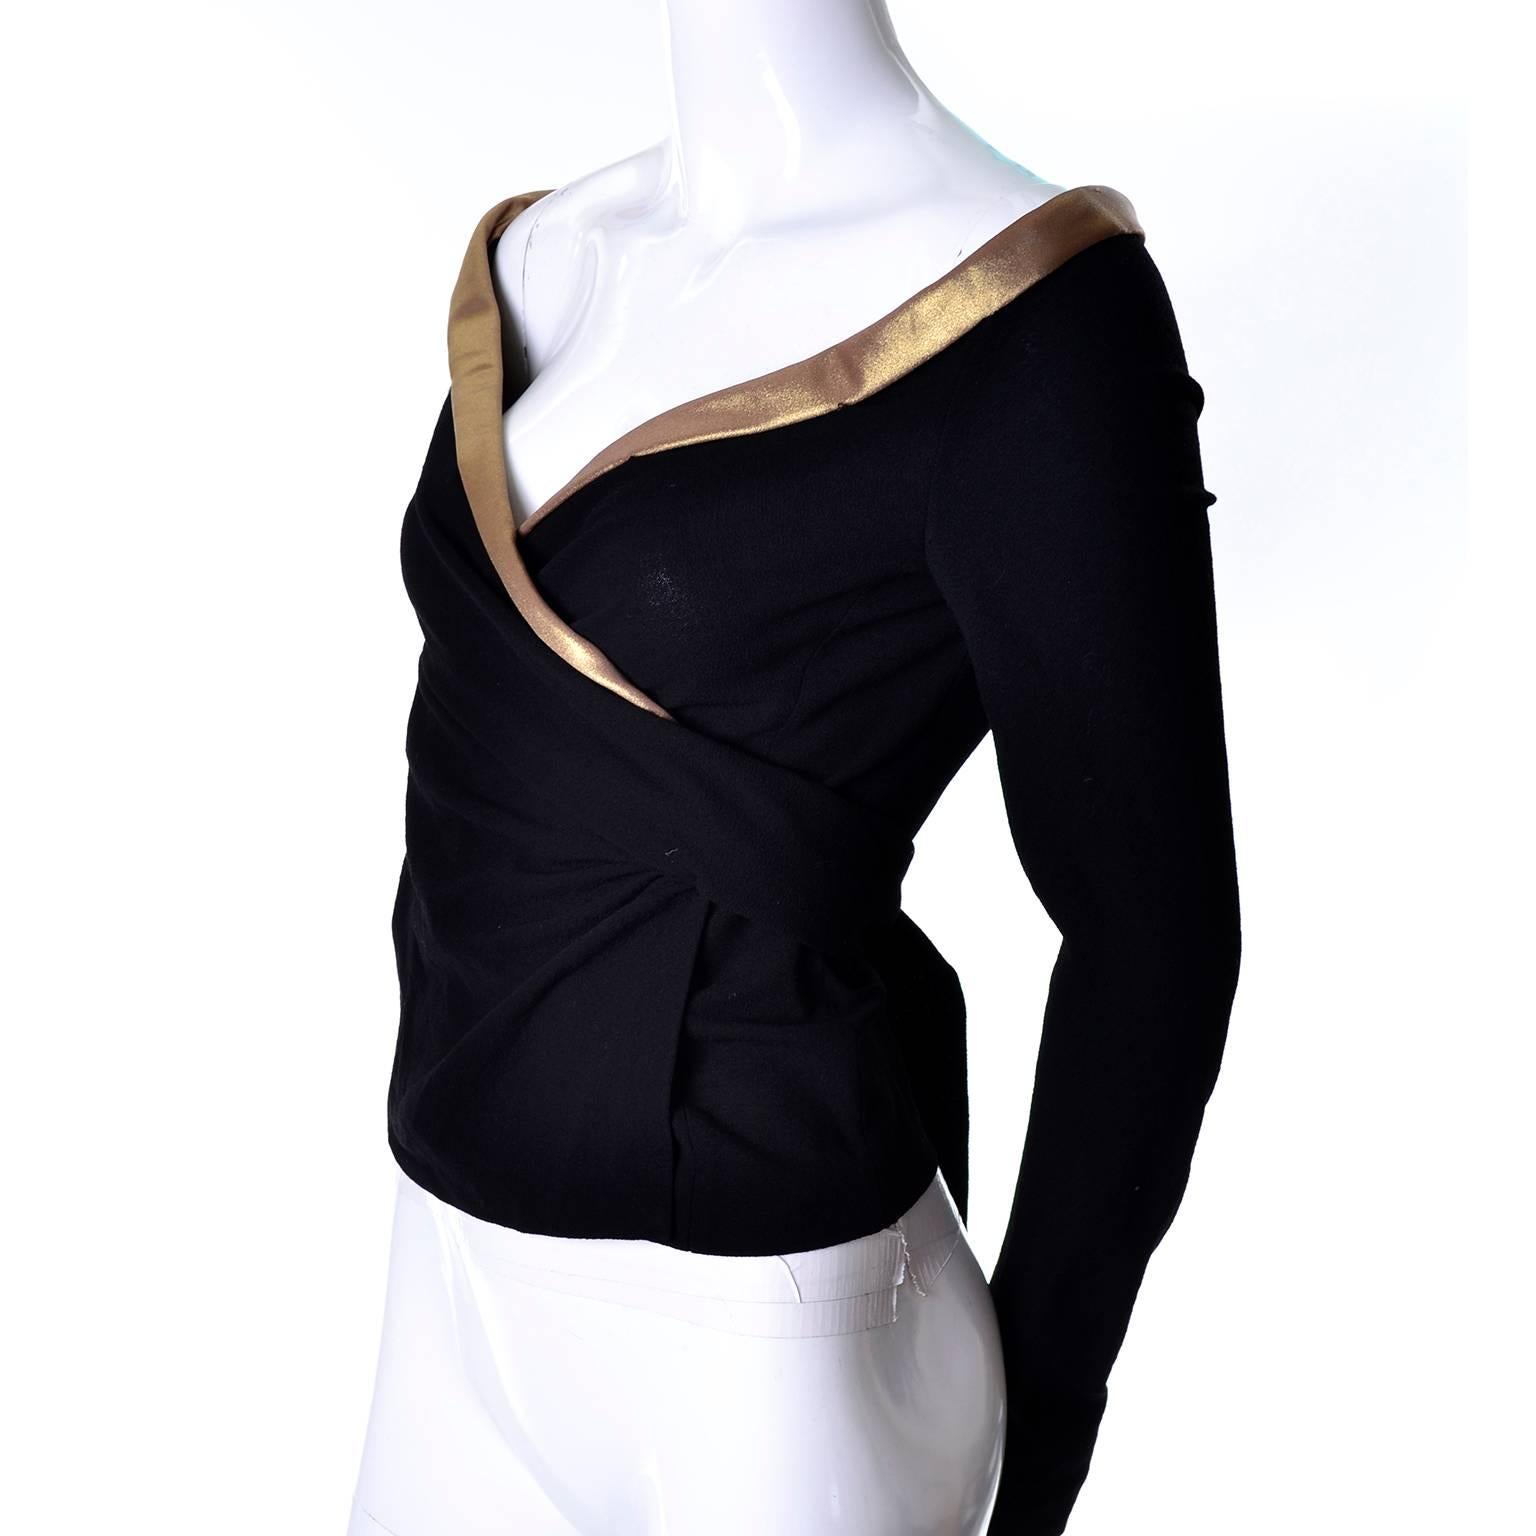 Women's Donna Karan Black Stretch Crepe Wool Vintage Wrap Top with Gold Trim NWT Small